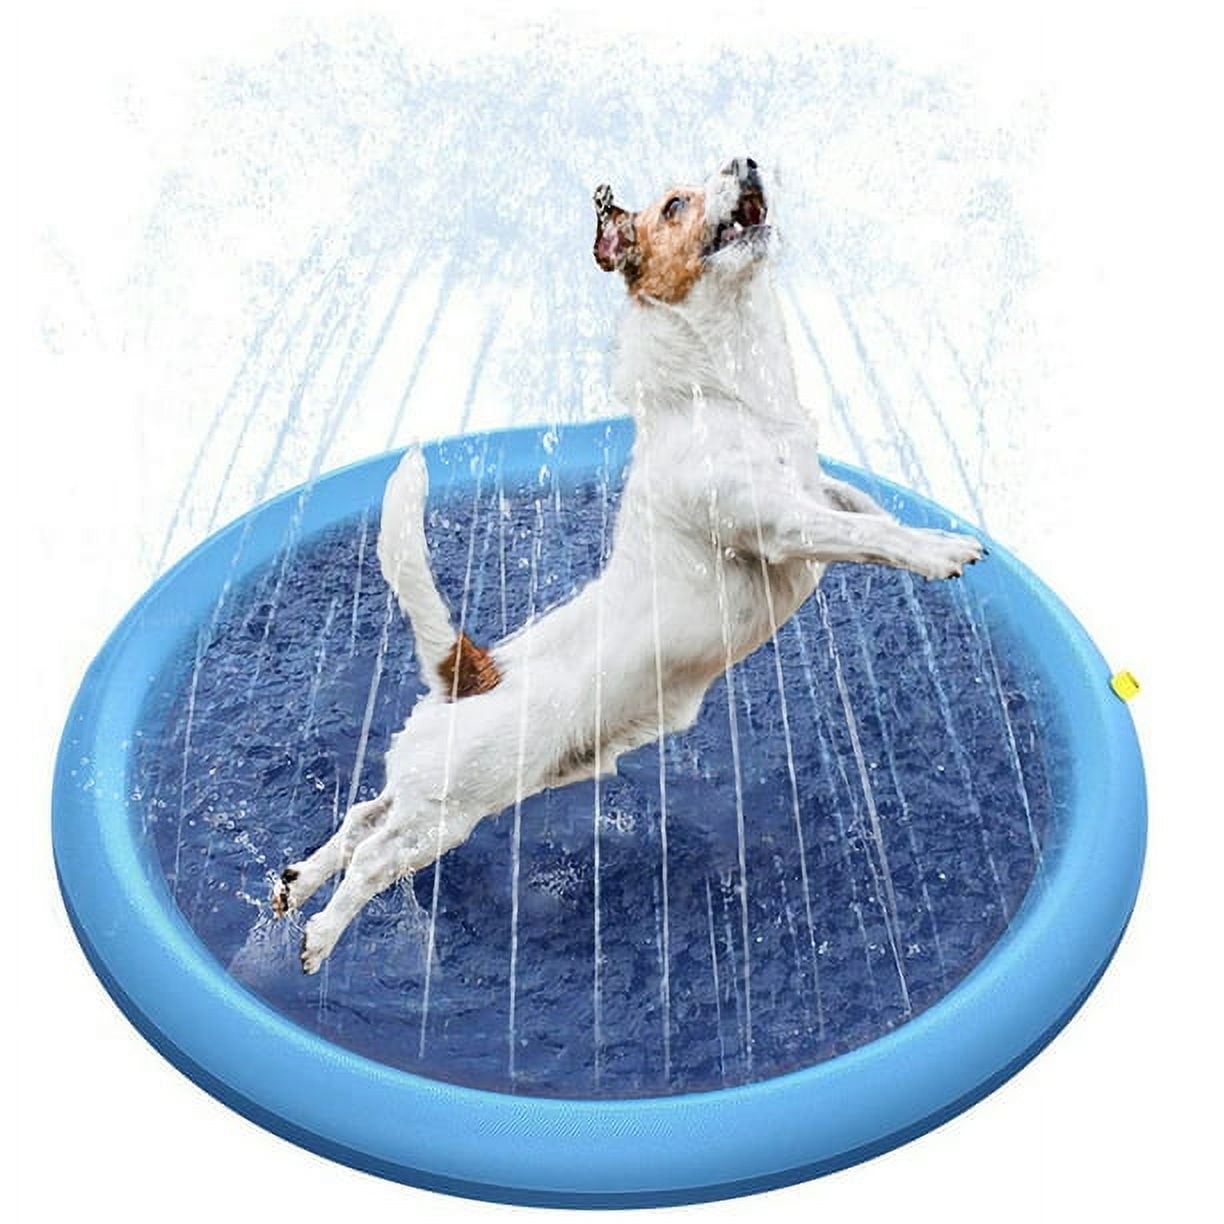 Thickened Splash Water Mat for Dogs, Summer Water Toy for Dogs, 1 Pack –  Petsoft